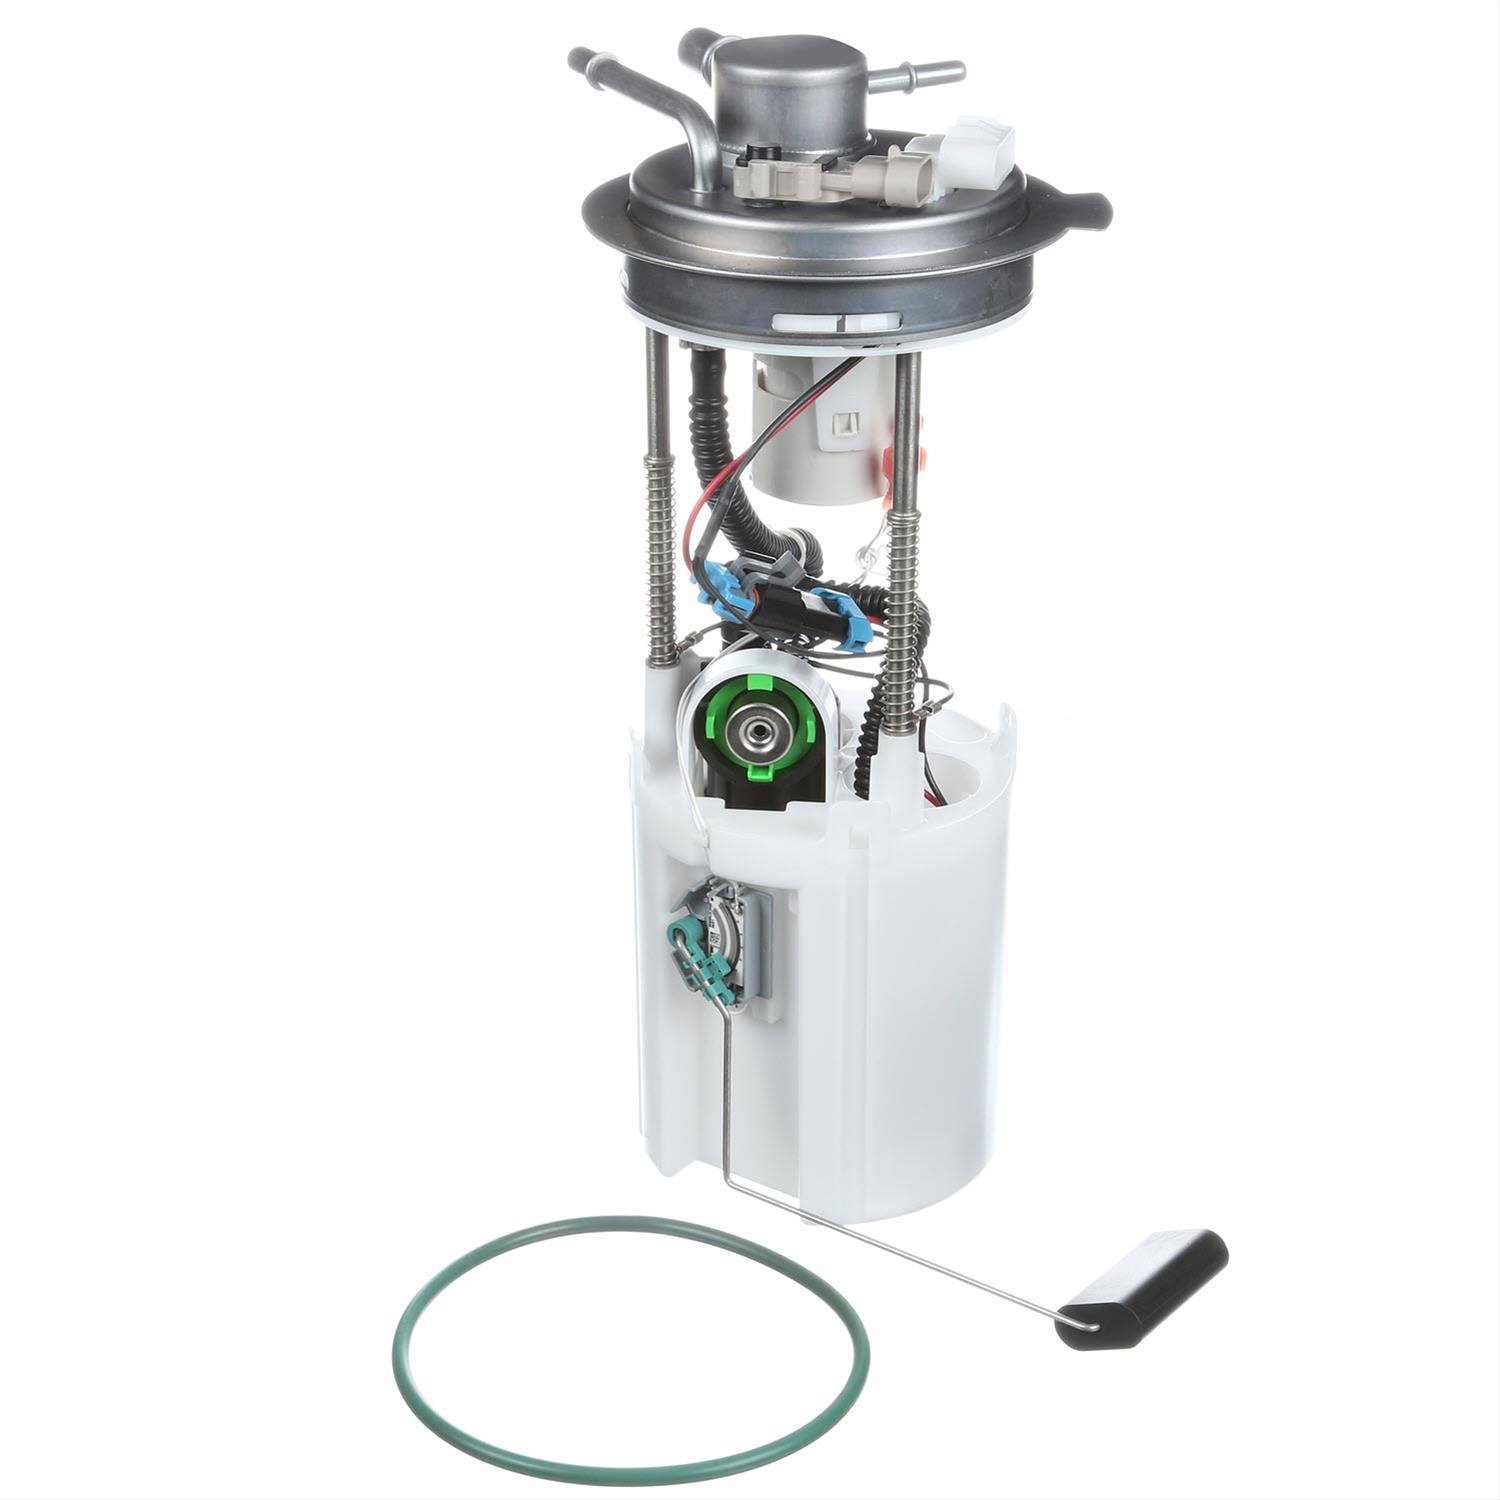 OE GM Replacement Electric Fuel Pump Module Assembly for 2006-2007 Chevy Silverado 1500/GMC Sierra 1500